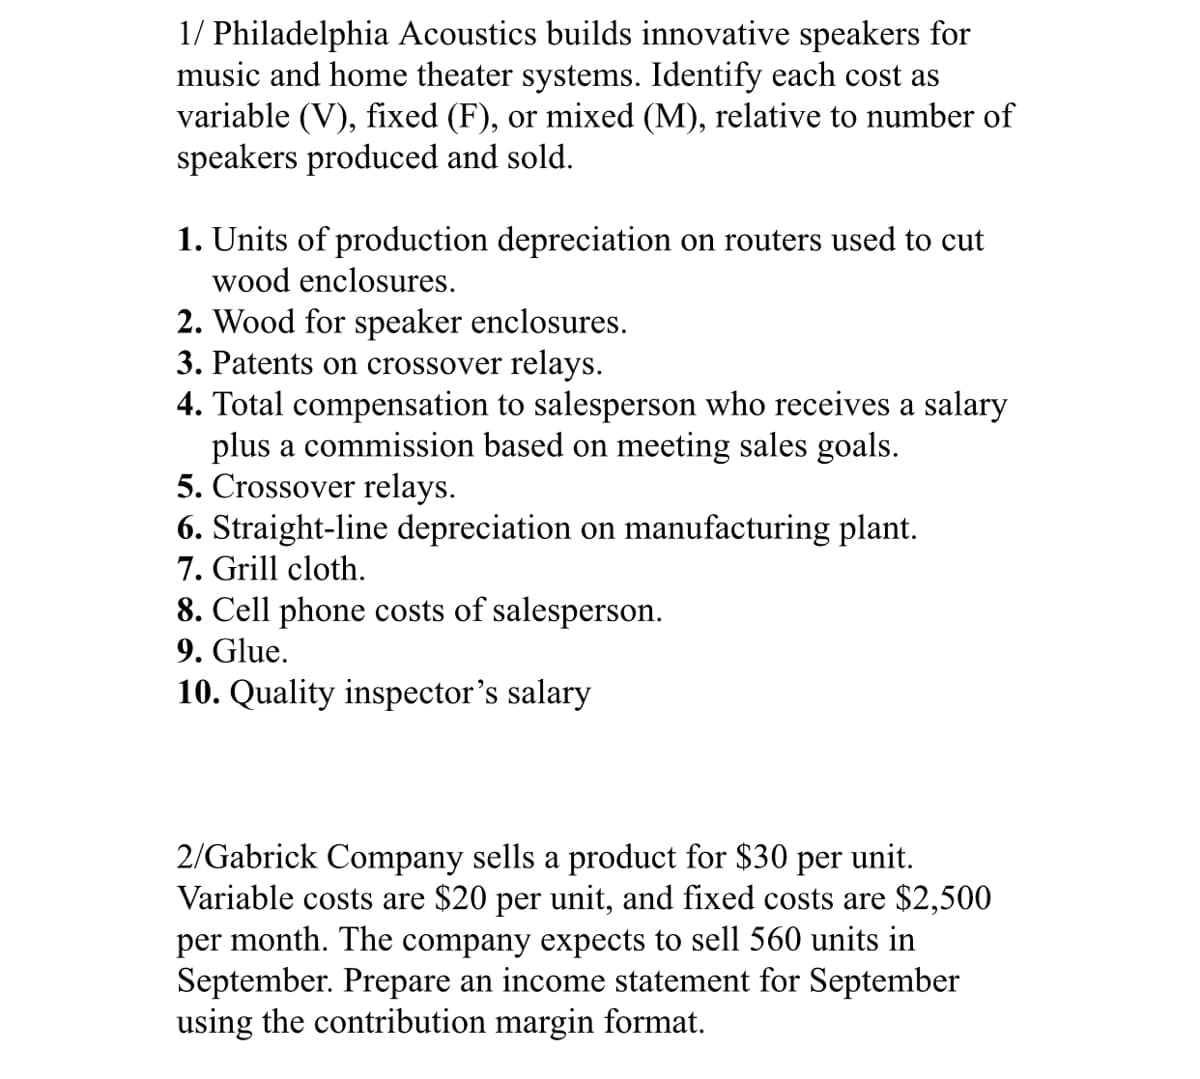 1/ Philadelphia Acoustics builds innovative speakers for
music and home theater systems. Identify each cost as
variable (V), fixed (F), or mixed (M), relative to number of
speakers produced and sold.
1. Units of production depreciation on routers used to cut
wood enclosures.
2. Wood for speaker enclosures.
3. Patents on crossover relays.
4. Total compensation to salesperson who receives a salary
plus a commission based on meeting sales goals.
5. Crossover relays.
6. Straight-line depreciation on manufacturing plant.
7. Grill cloth.
8. Cell phone costs of salesperson.
9. Glue.
10. Quality inspector's salary
2/Gabrick Company sells a product for $30 per unit.
Variable costs are $20 per unit, and fixed costs are $2,500
per month. The company expects to sell 560 units in
September. Prepare an income statement for September
using the contribution margin format.
